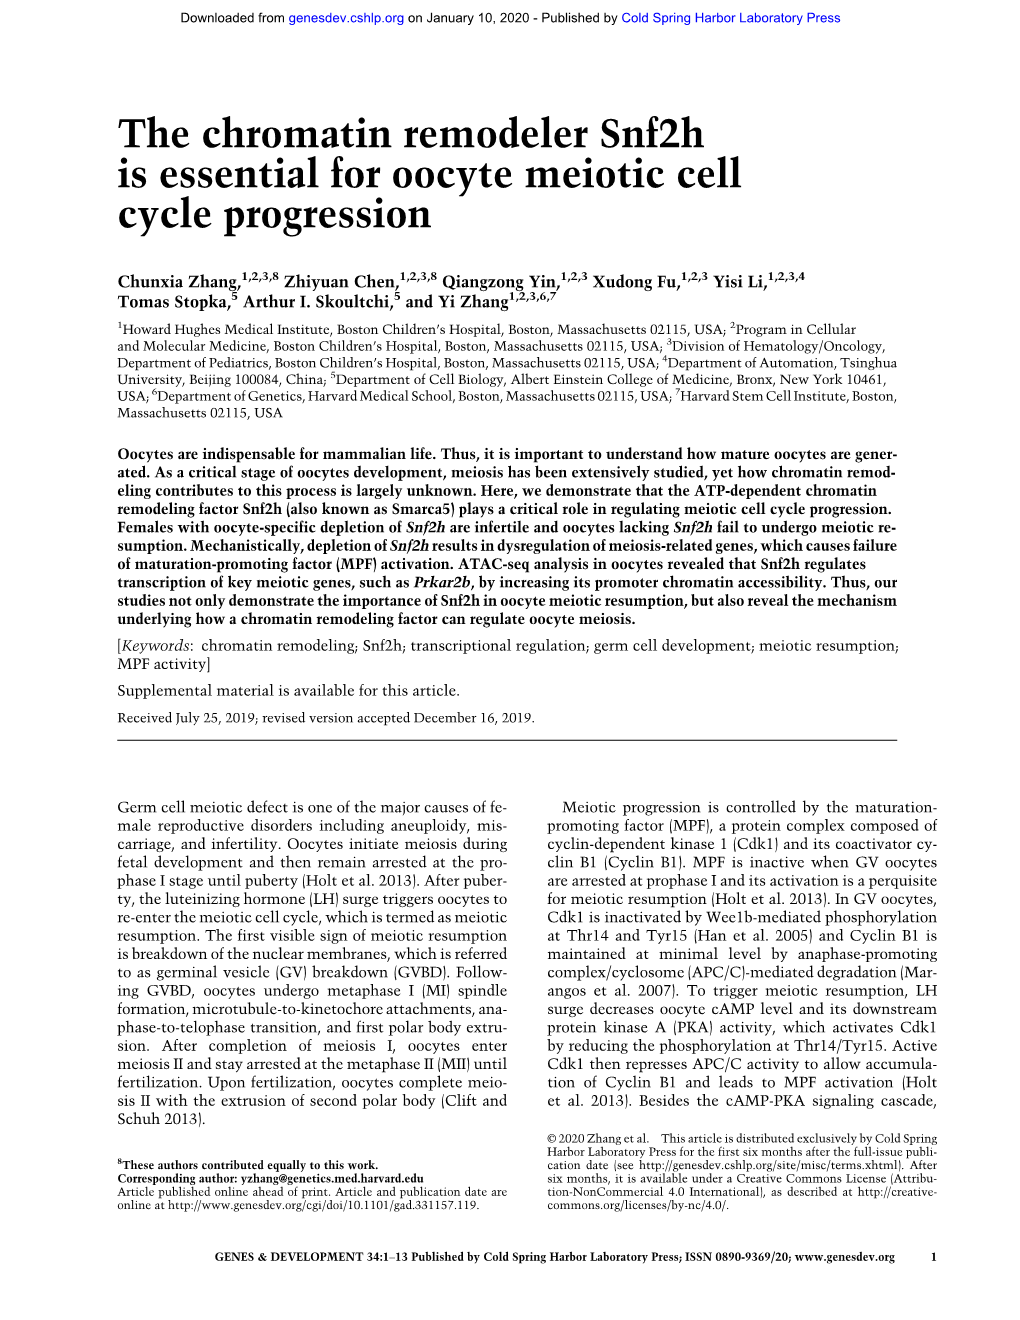 The Chromatin Remodeler Snf2h Is Essential for Oocyte Meiotic Cell Cycle Progression